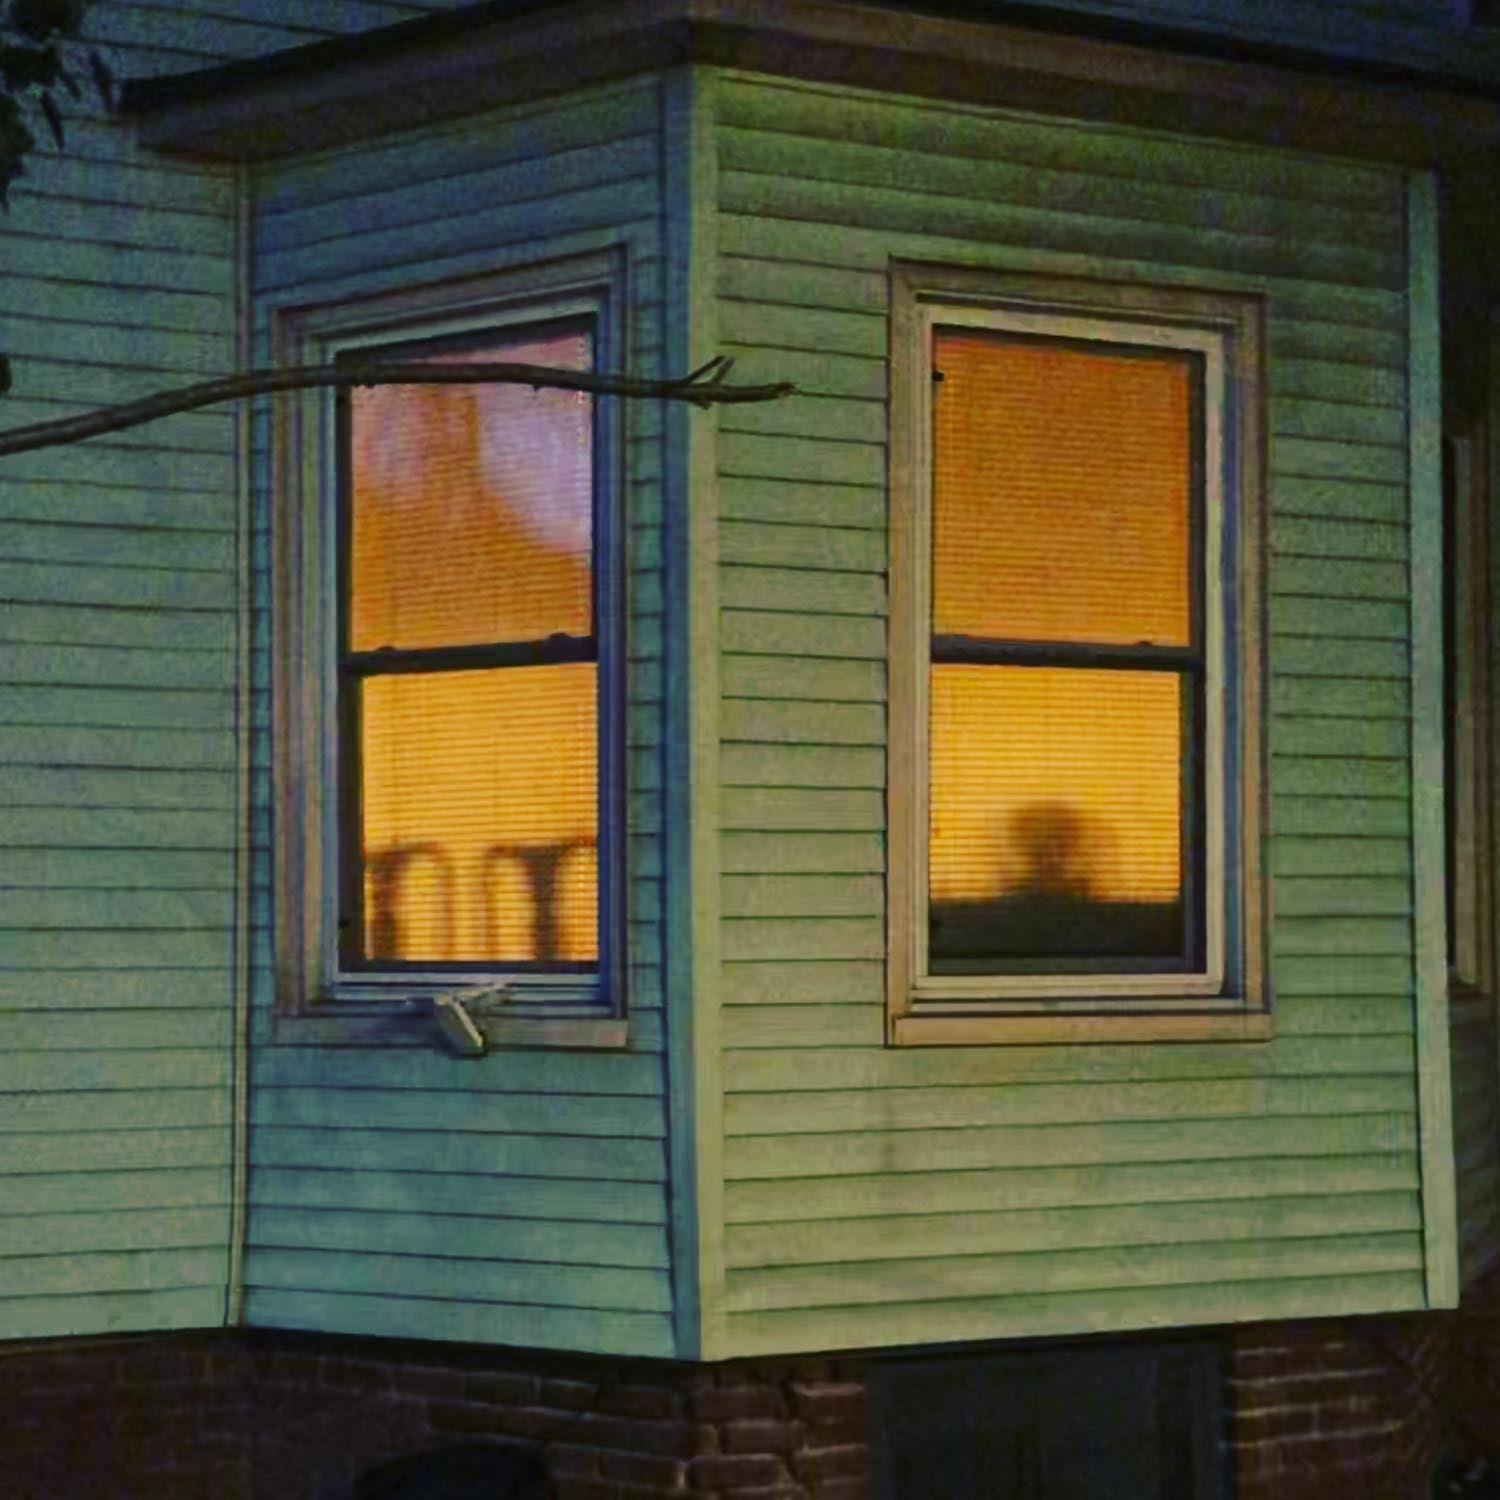 Social distance view of window from the outside.